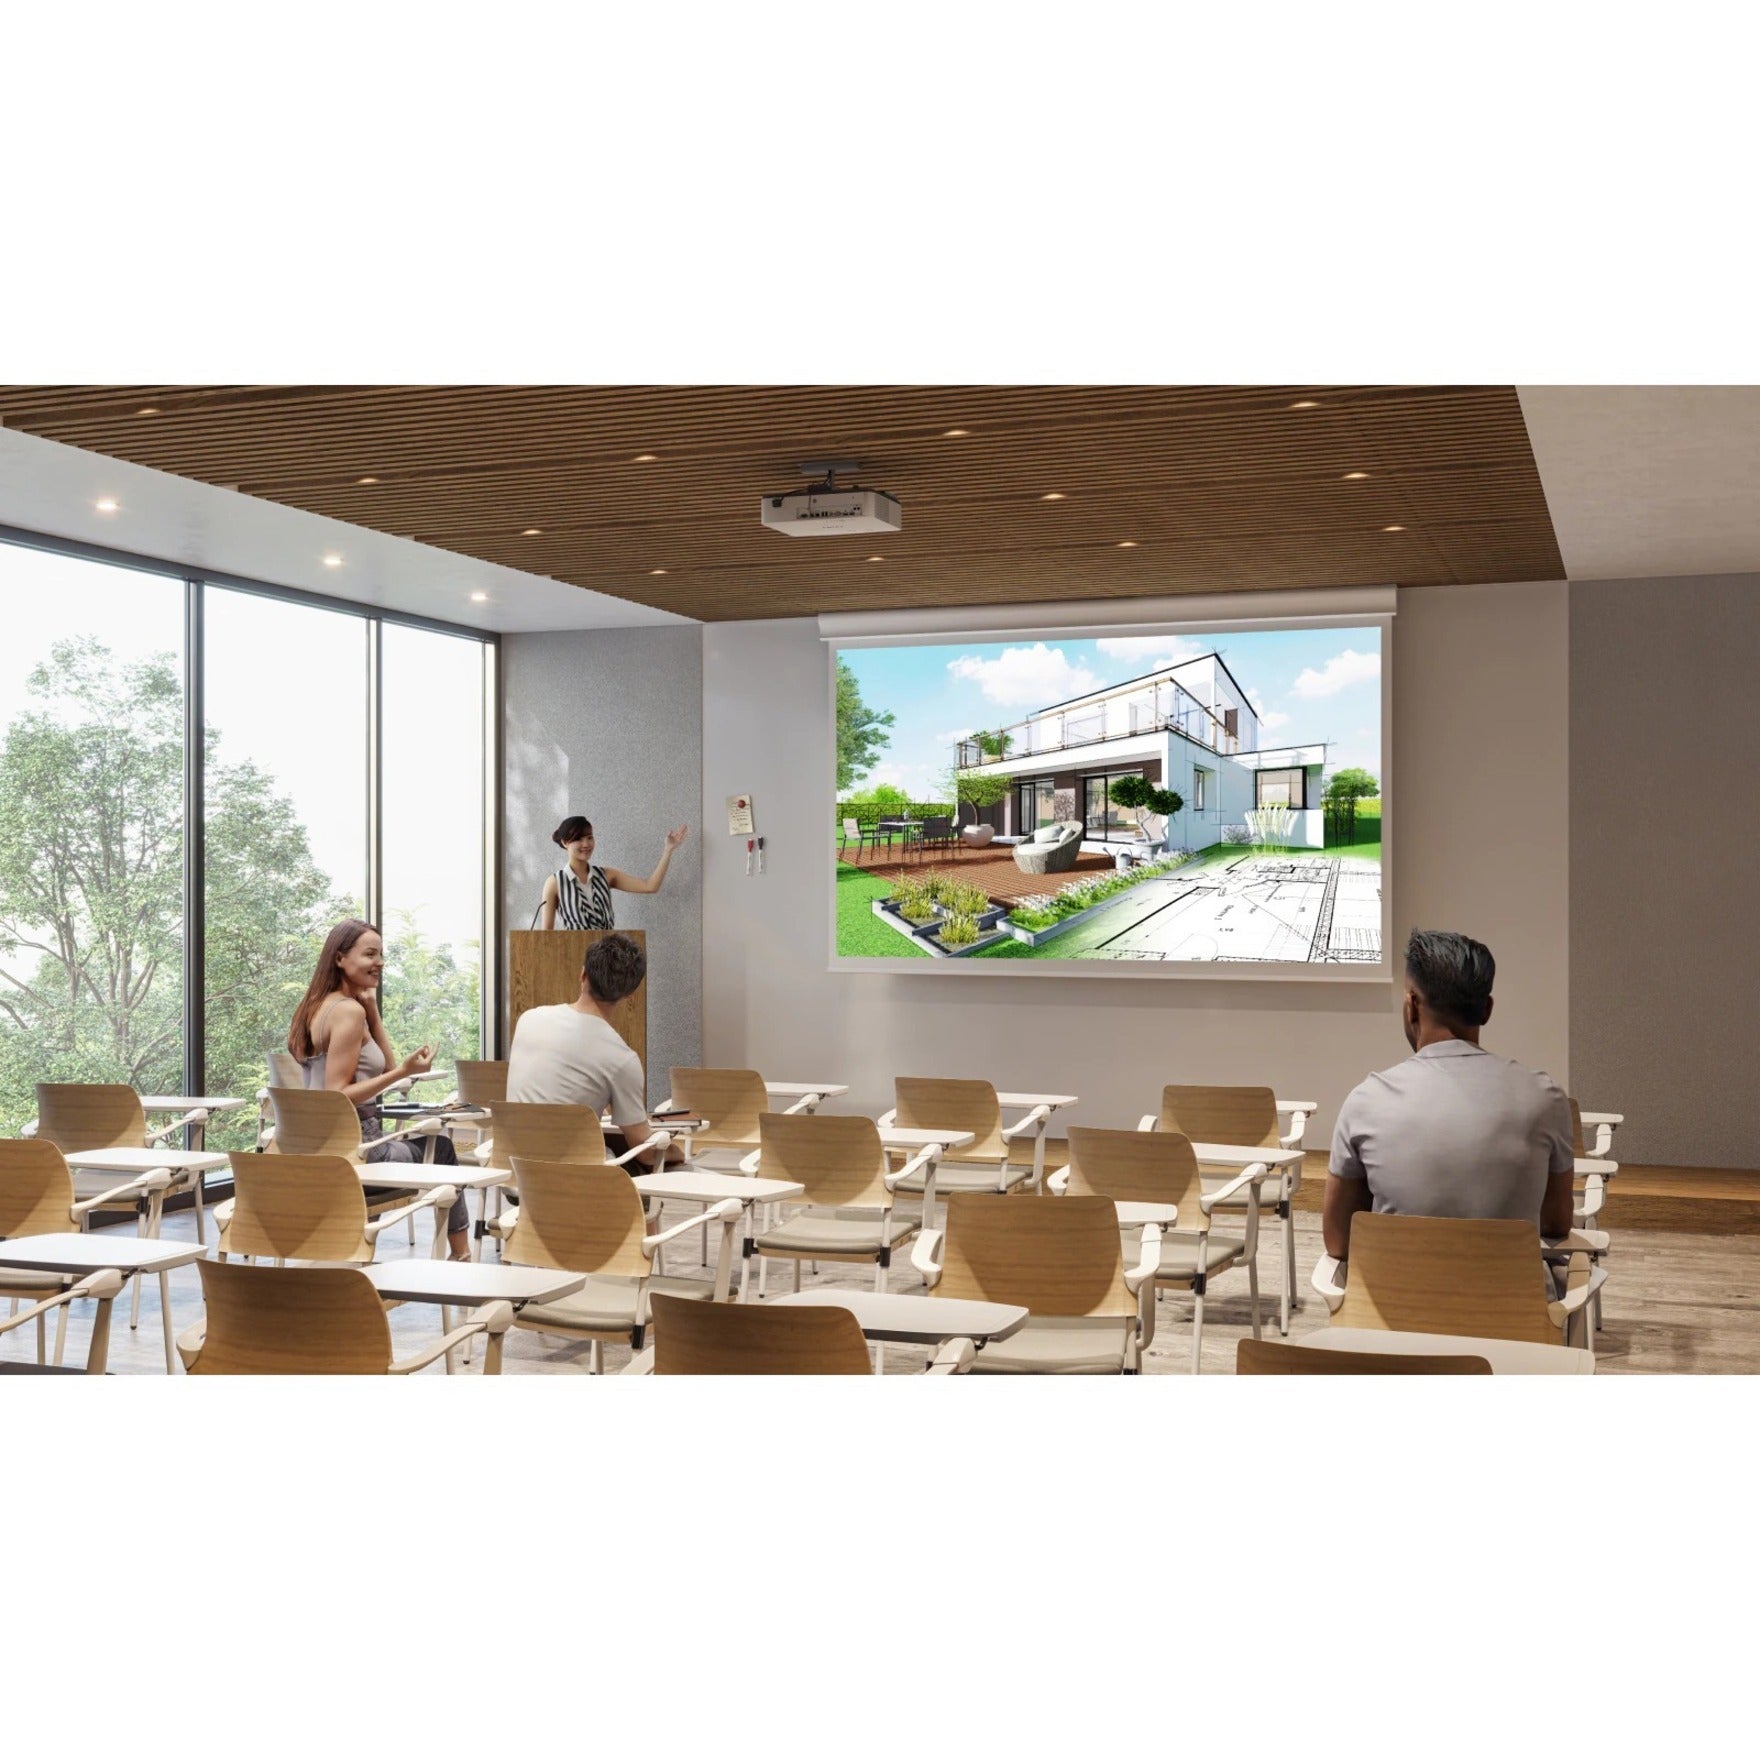 Sony VPLPHZ61 VPL-PHZ61 3LCD Projector, WUXGA, 6400 lm, Laser Diode, 1.6x Optical Zoom, 25 ft Image Size, HDMI, USB, RJ-45, Wireless LAN, Speaker Included